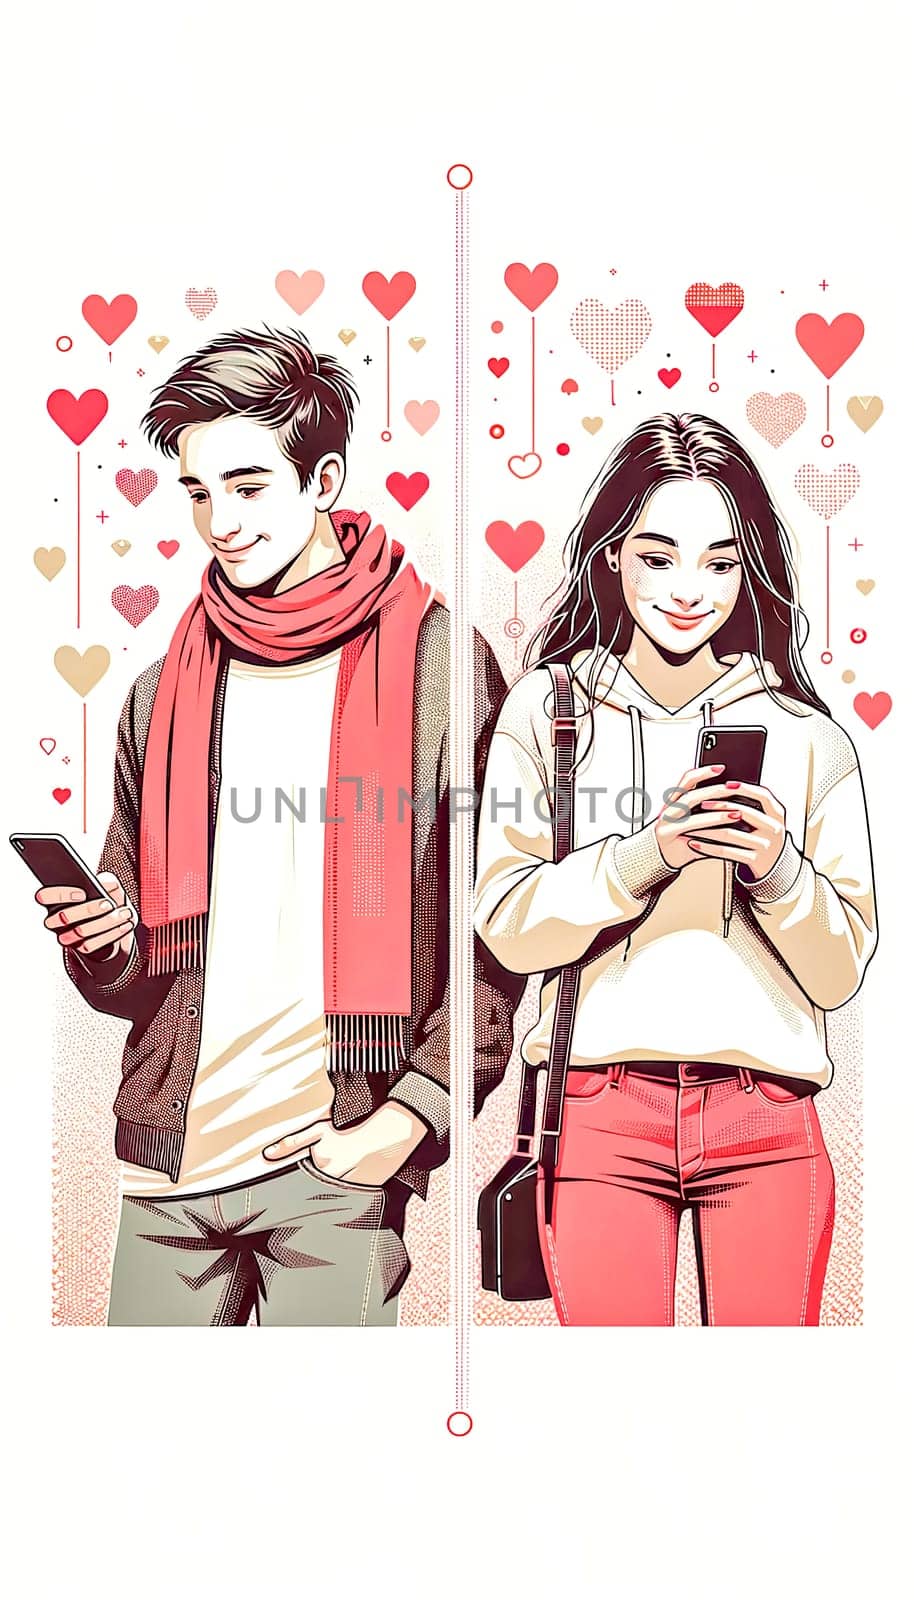 online dating site, young man and woman standing side by side, both holding smartphones and smiling at their screens, vertical